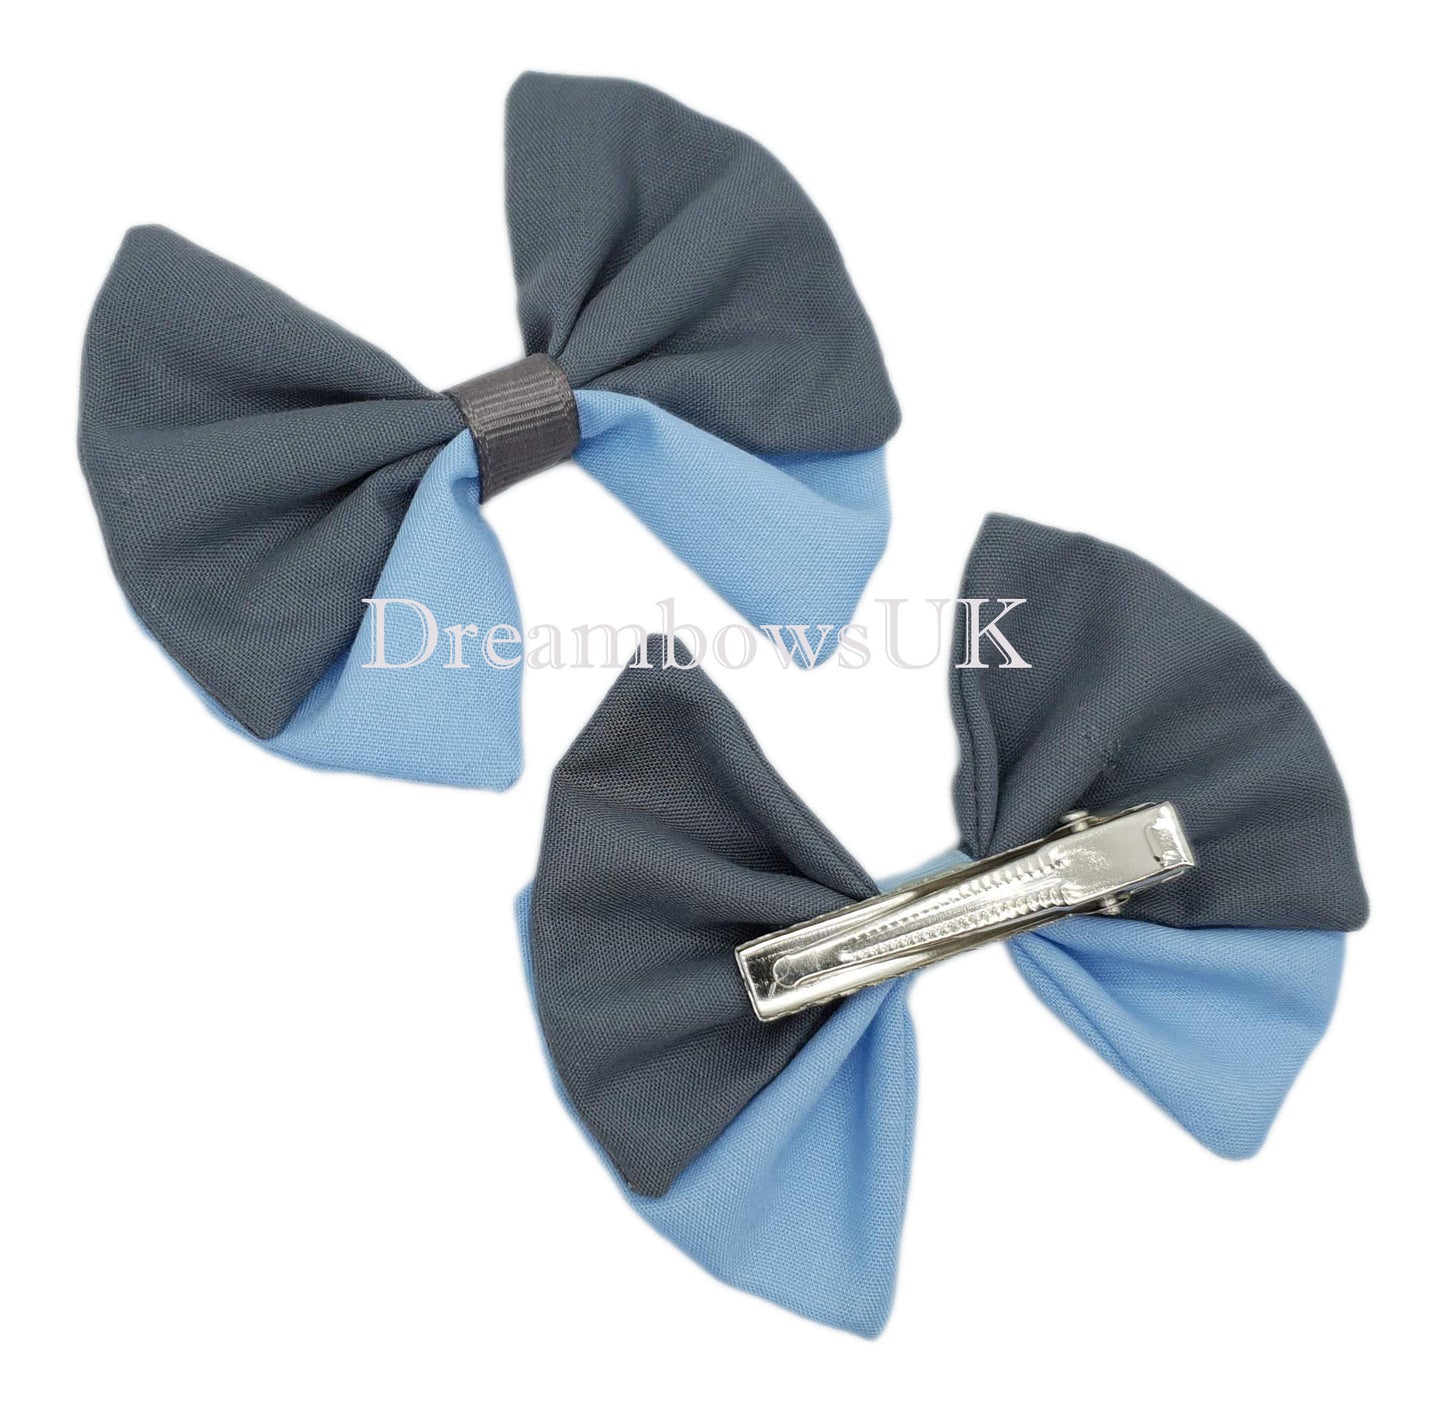 2x Grey and baby blue fabric hair bows